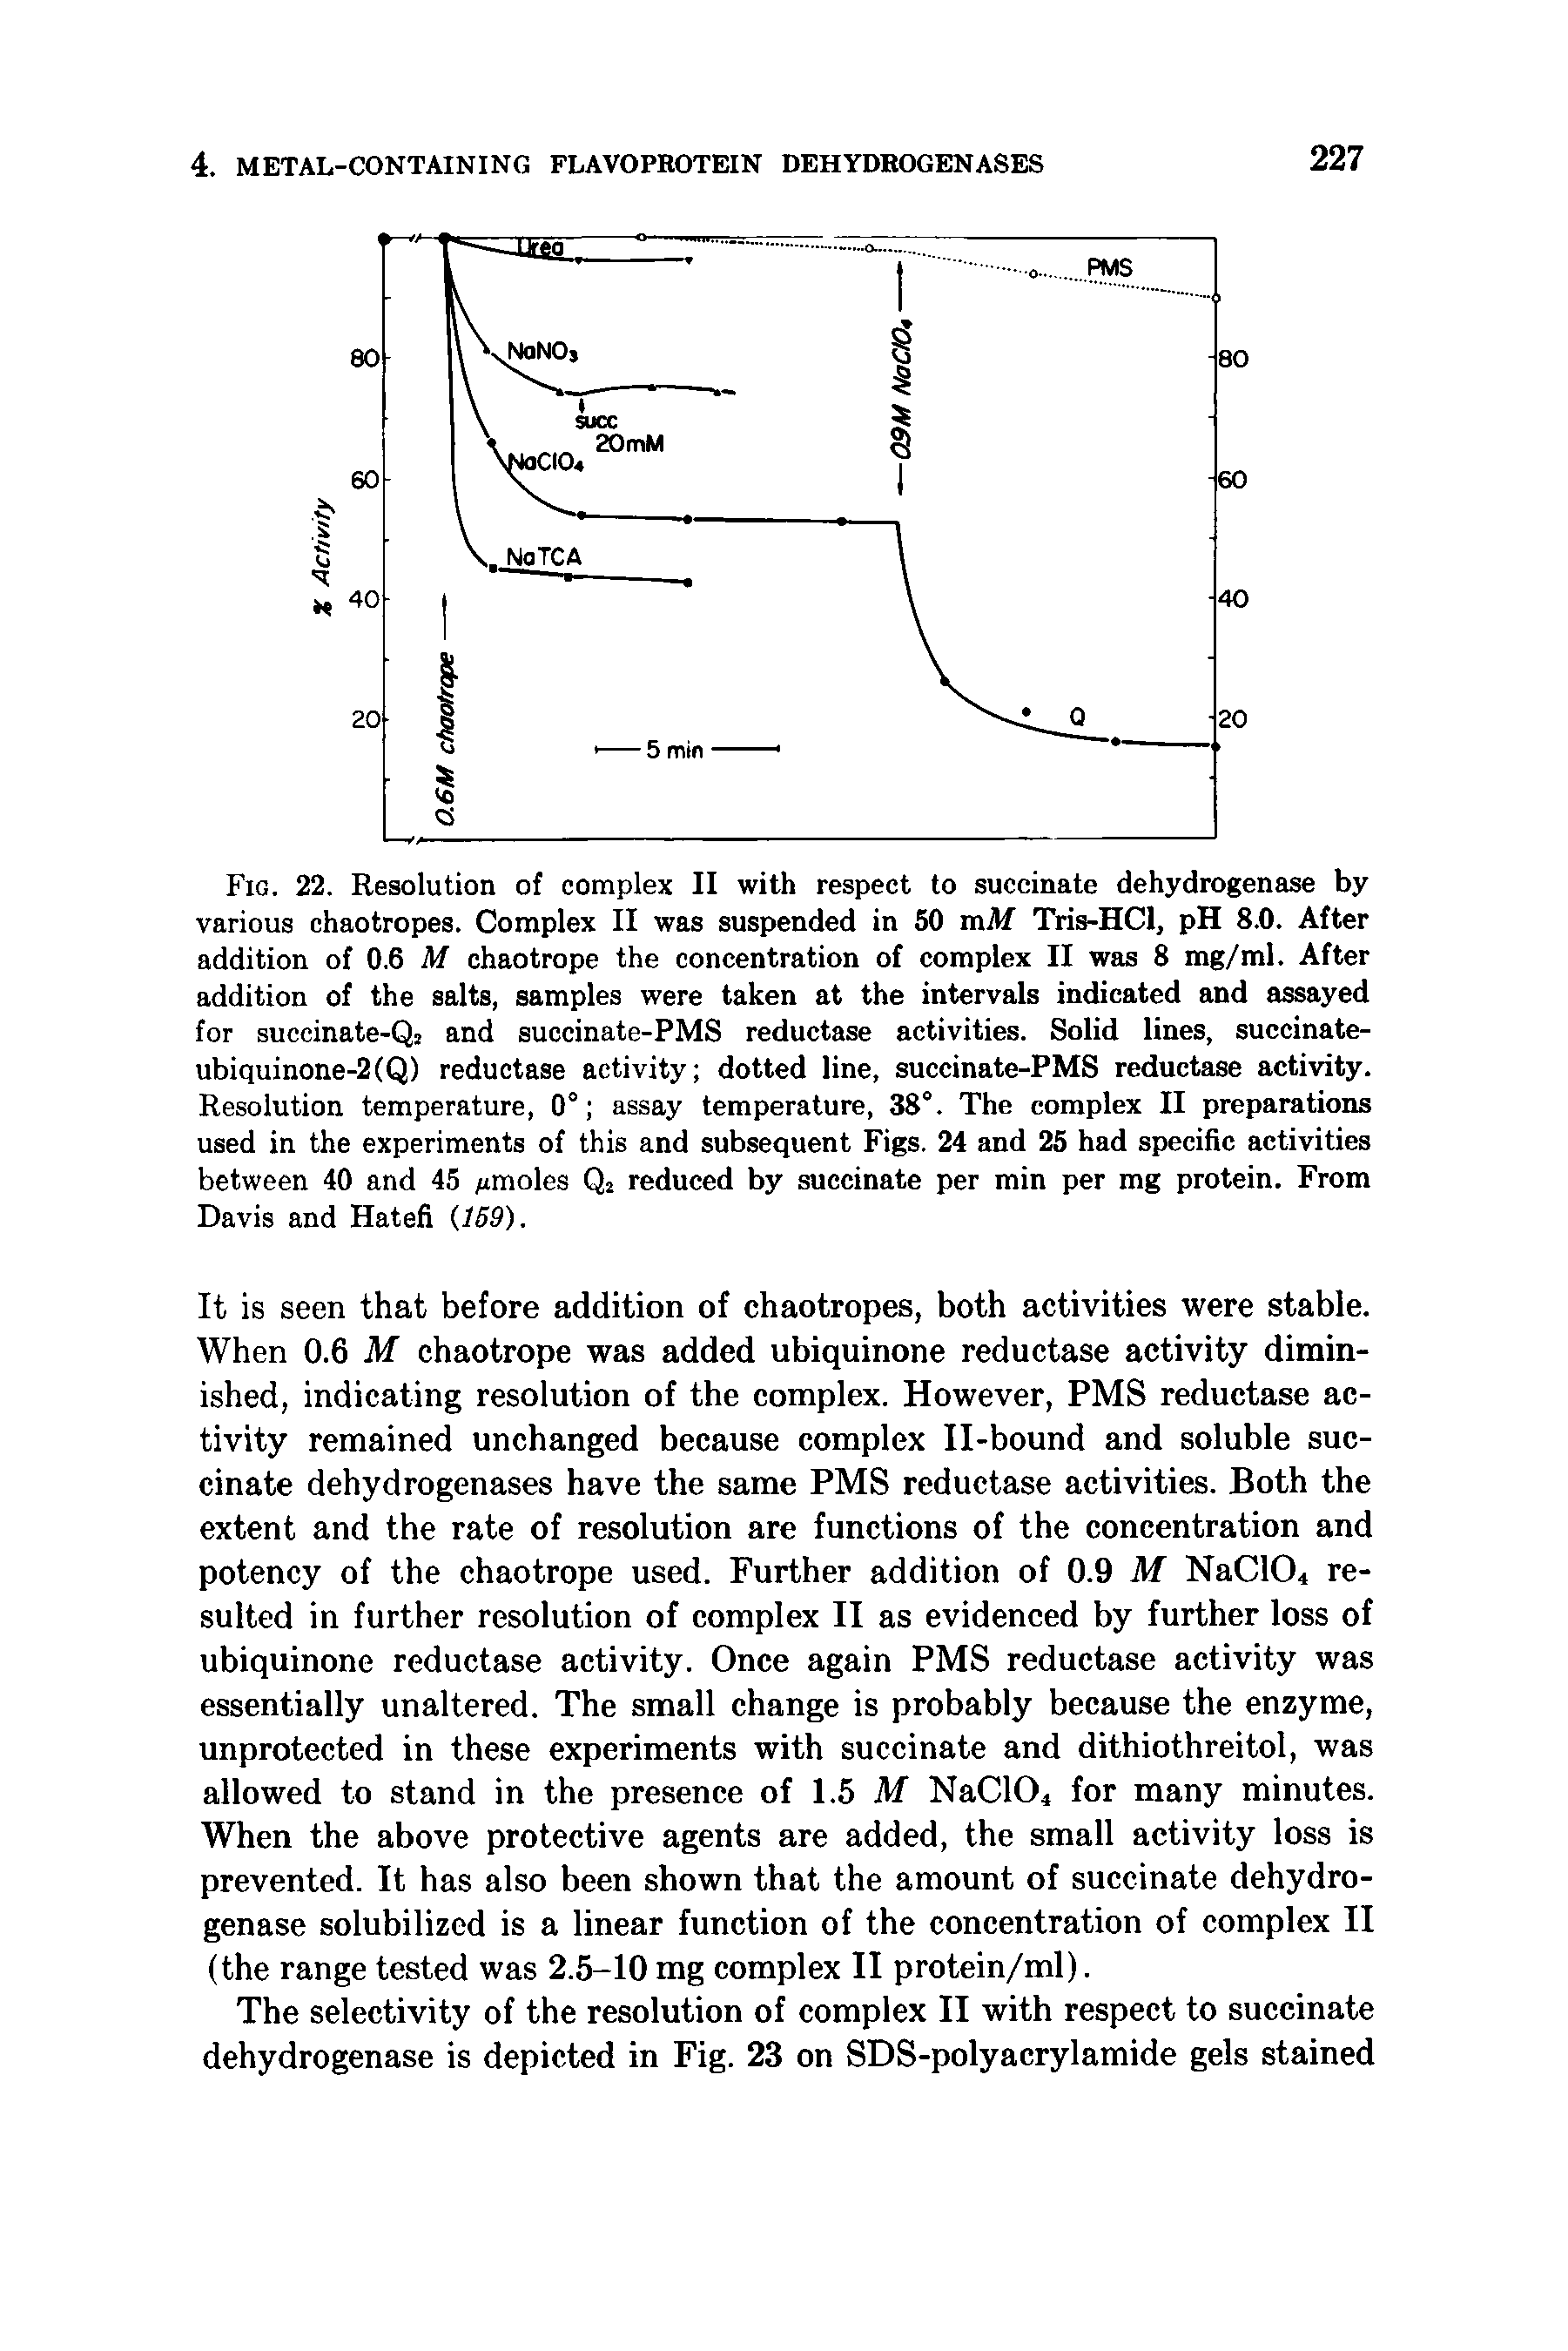 Fig. 22. Resolution of complex II with respect to succinate dehydrogenase by various chaotropes. Complex II was suspended in 50 mAf Tris-HCl, pH 8.0. After addition of 0.6 M chaotrope the concentration of complex II was 8 mg/ml. After addition of the salts, samples were taken at the intervals indicated and assayed for succinate-Qj and succinate-PMS reductase activities. Solid lines, succinate-ubiquinone-2(Q) reductase activity dotted line, succinate-PMS reductase activity. Resolution temperature, 0° assay temperature, 38°. The complex II preparations used in the experiments of this and subsequent Figs. 24 and 25 had specific activities between 40 and 45 iimoles Qi reduced by succinate per min per mg protein. From Davis and Hatefi (159).